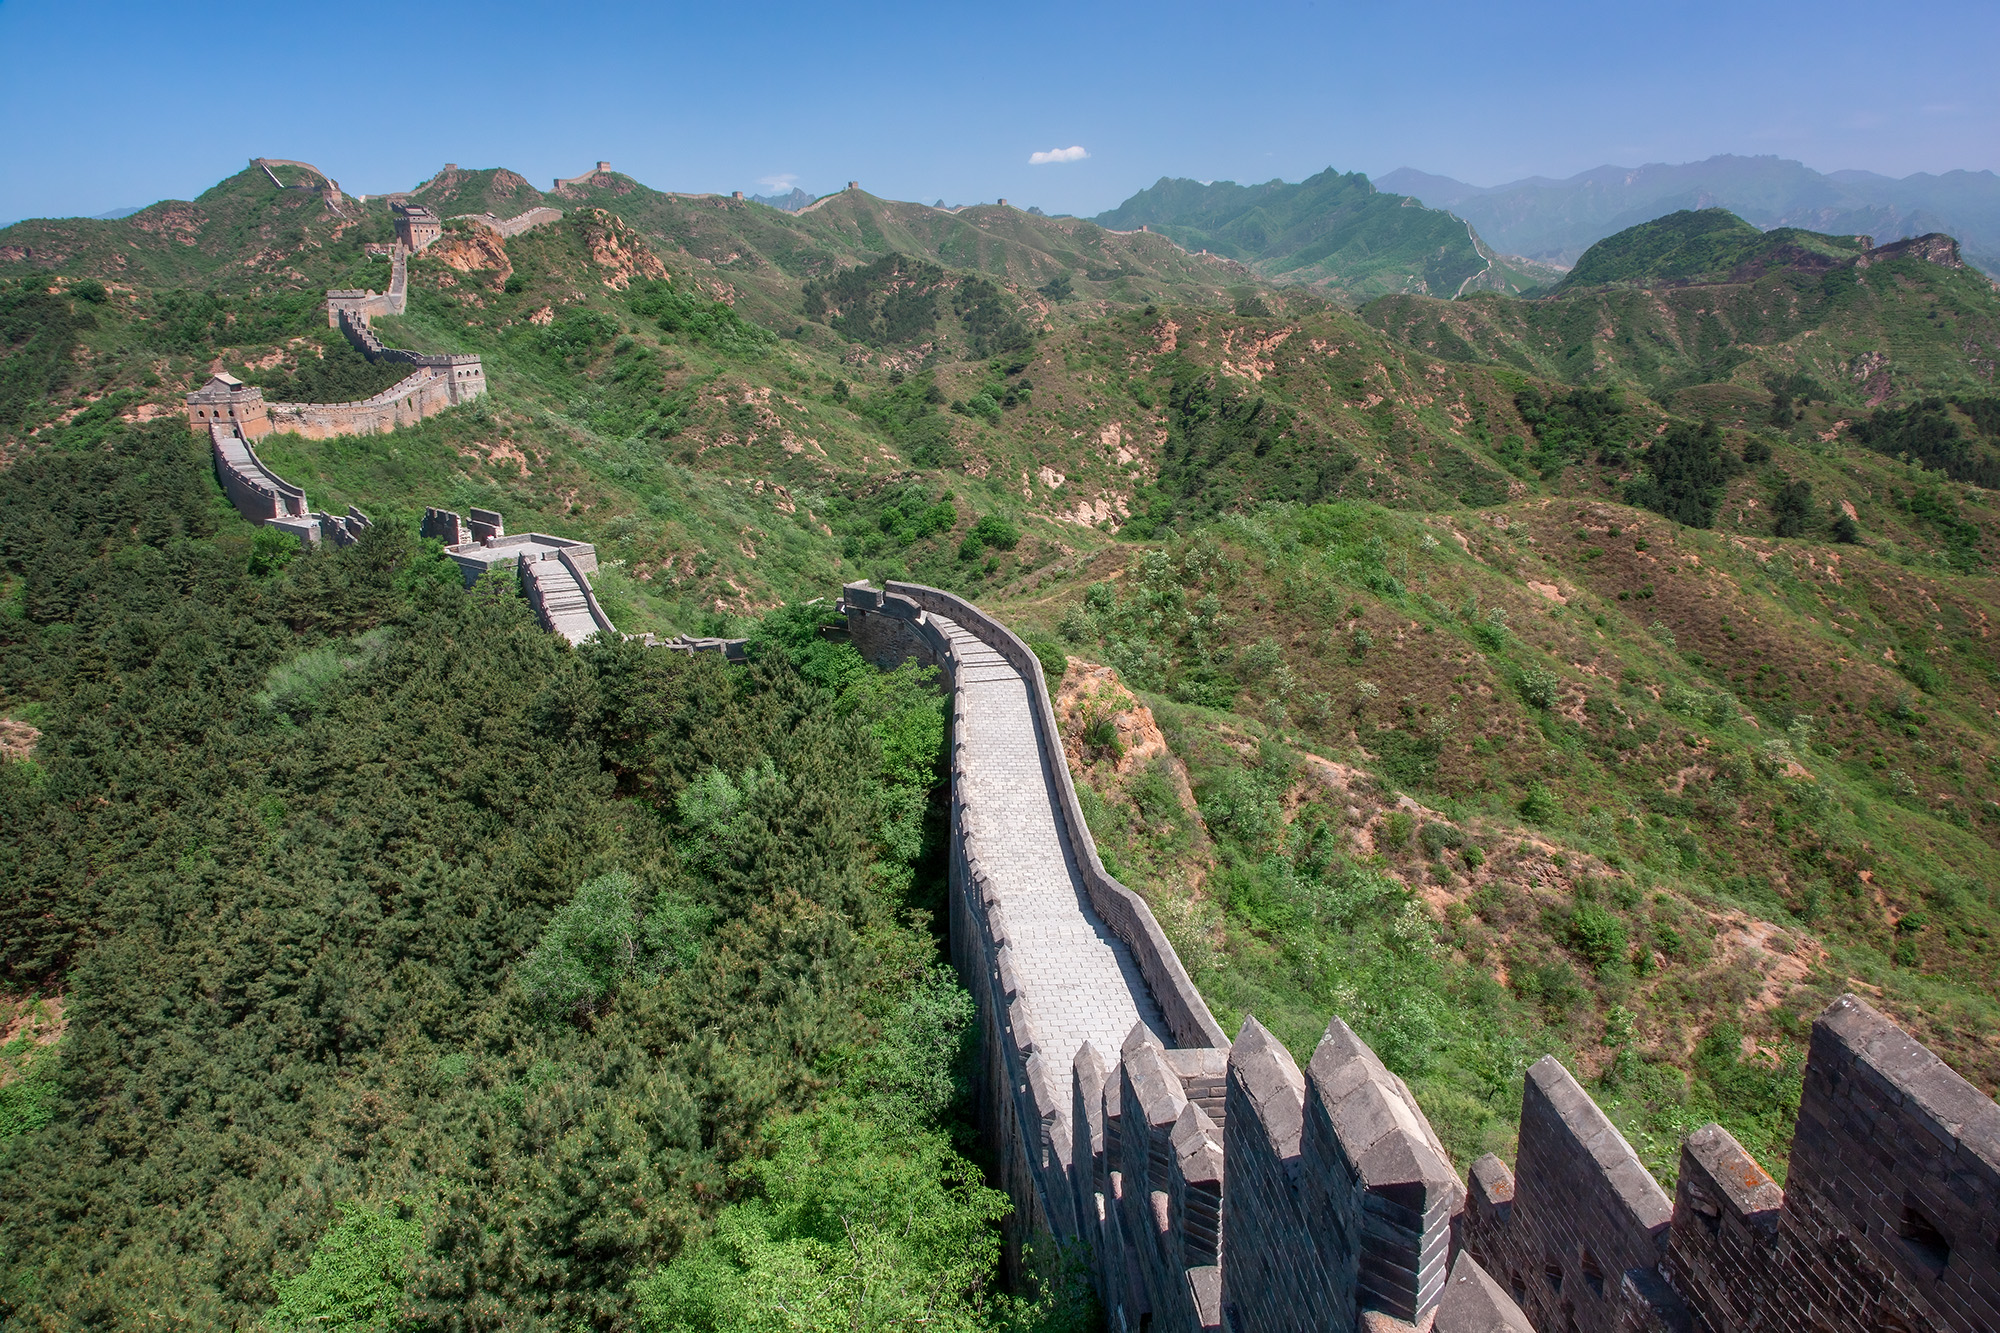 This image, captured while hiking the Jingshaling Section of China's Great Wall, unveils a breathtaking spectacle. The undulating...